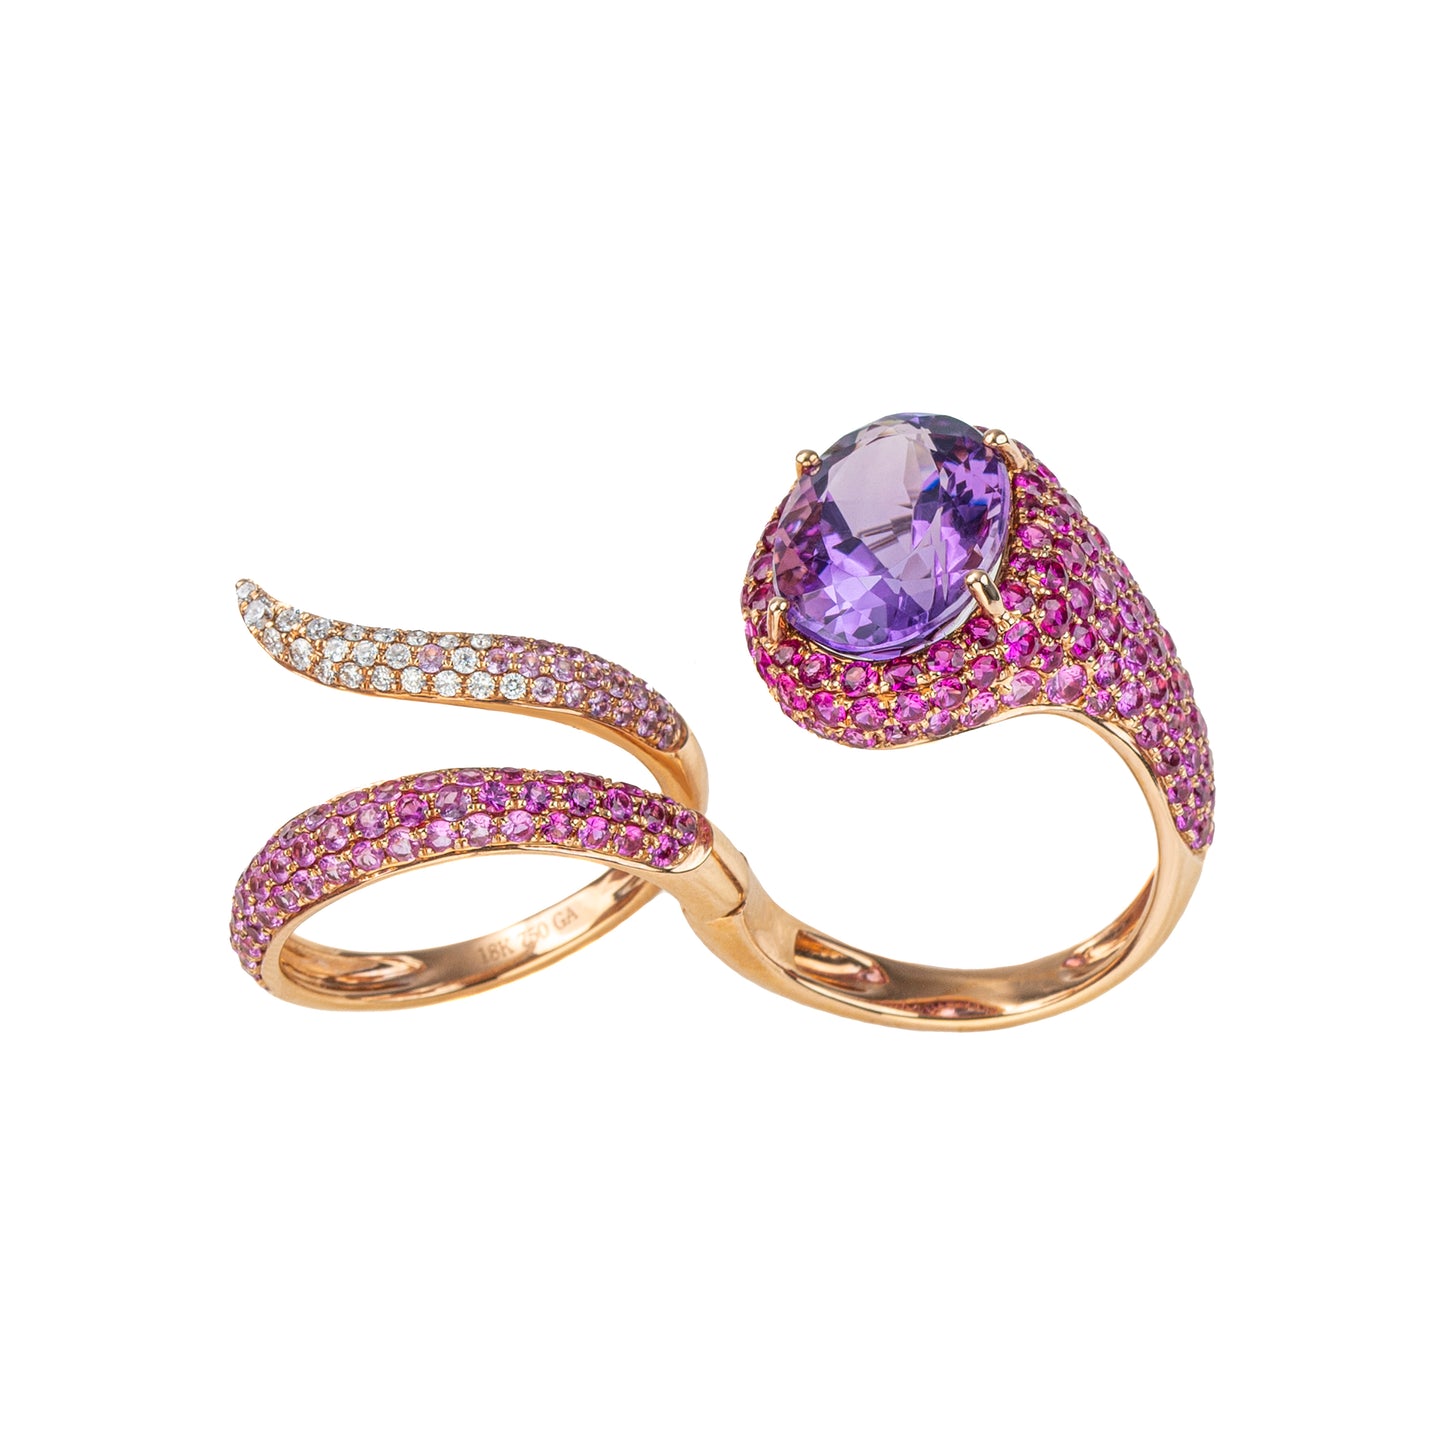 Pink Sapphire and Amethyst Coiled Ring with Halo from Convertible Collection